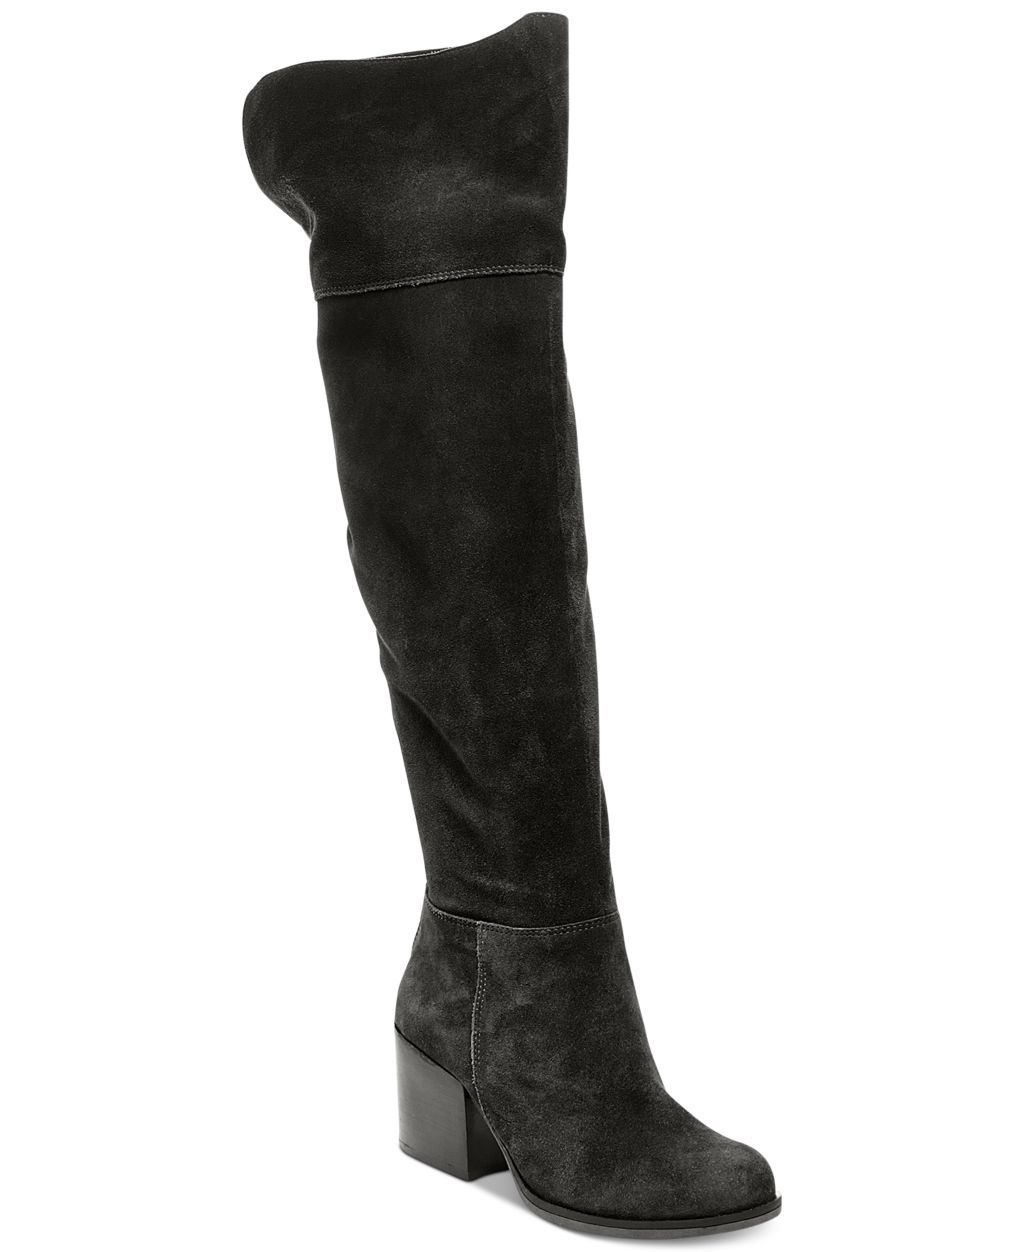 Steve Madden Manmade Sole Women's Orabela Over-The-Knee Boots